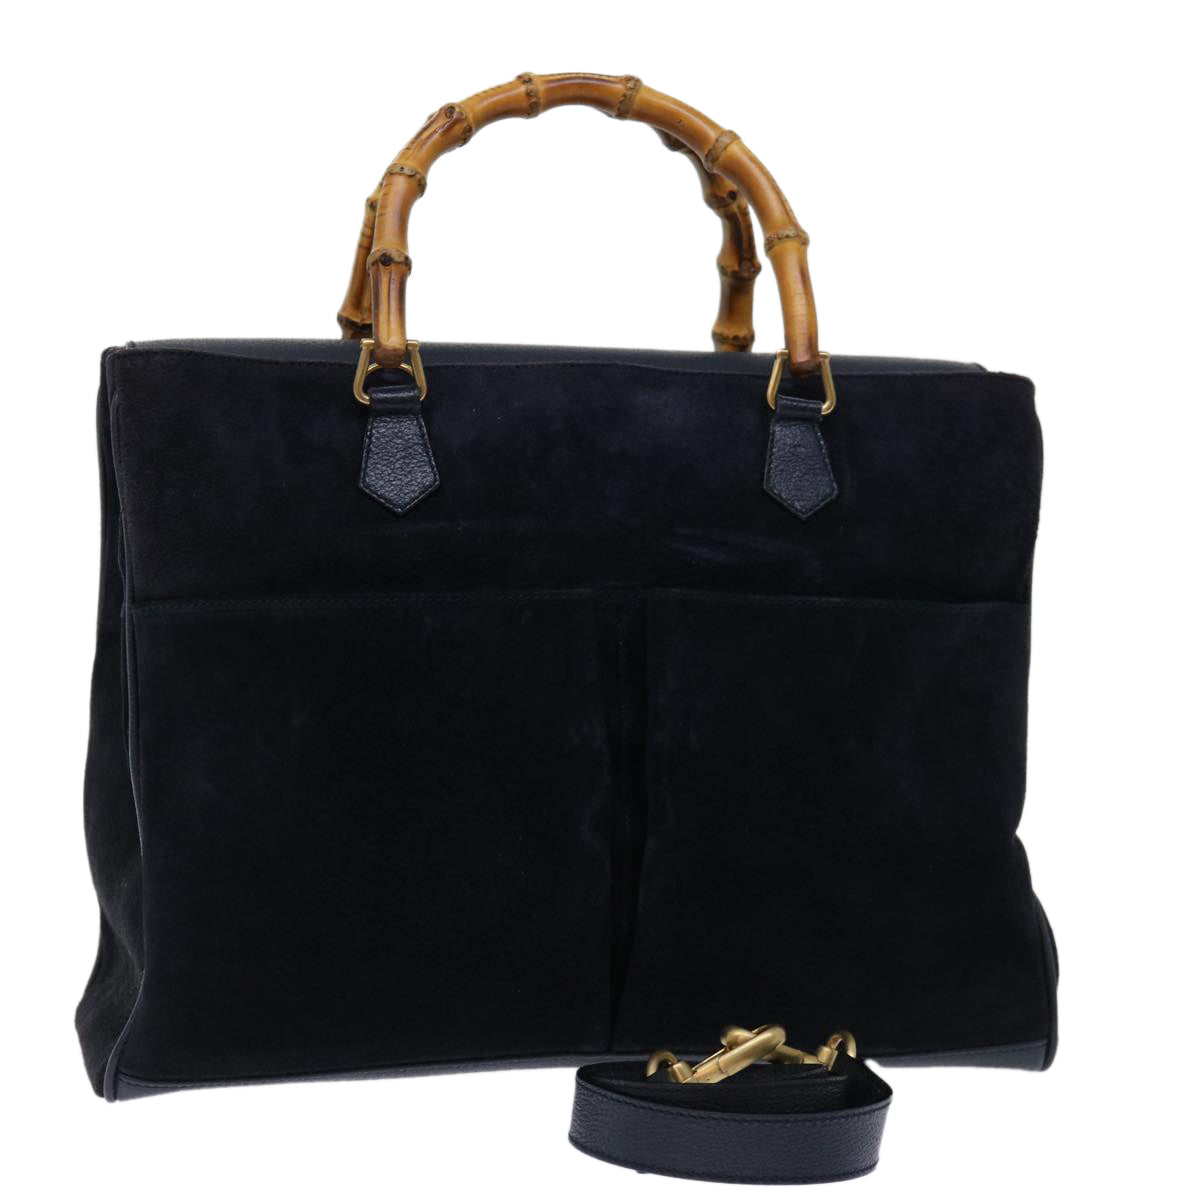 GUCCI Bamboo Tote Bag Suede 2way Black 002 2855 Auth ep3654